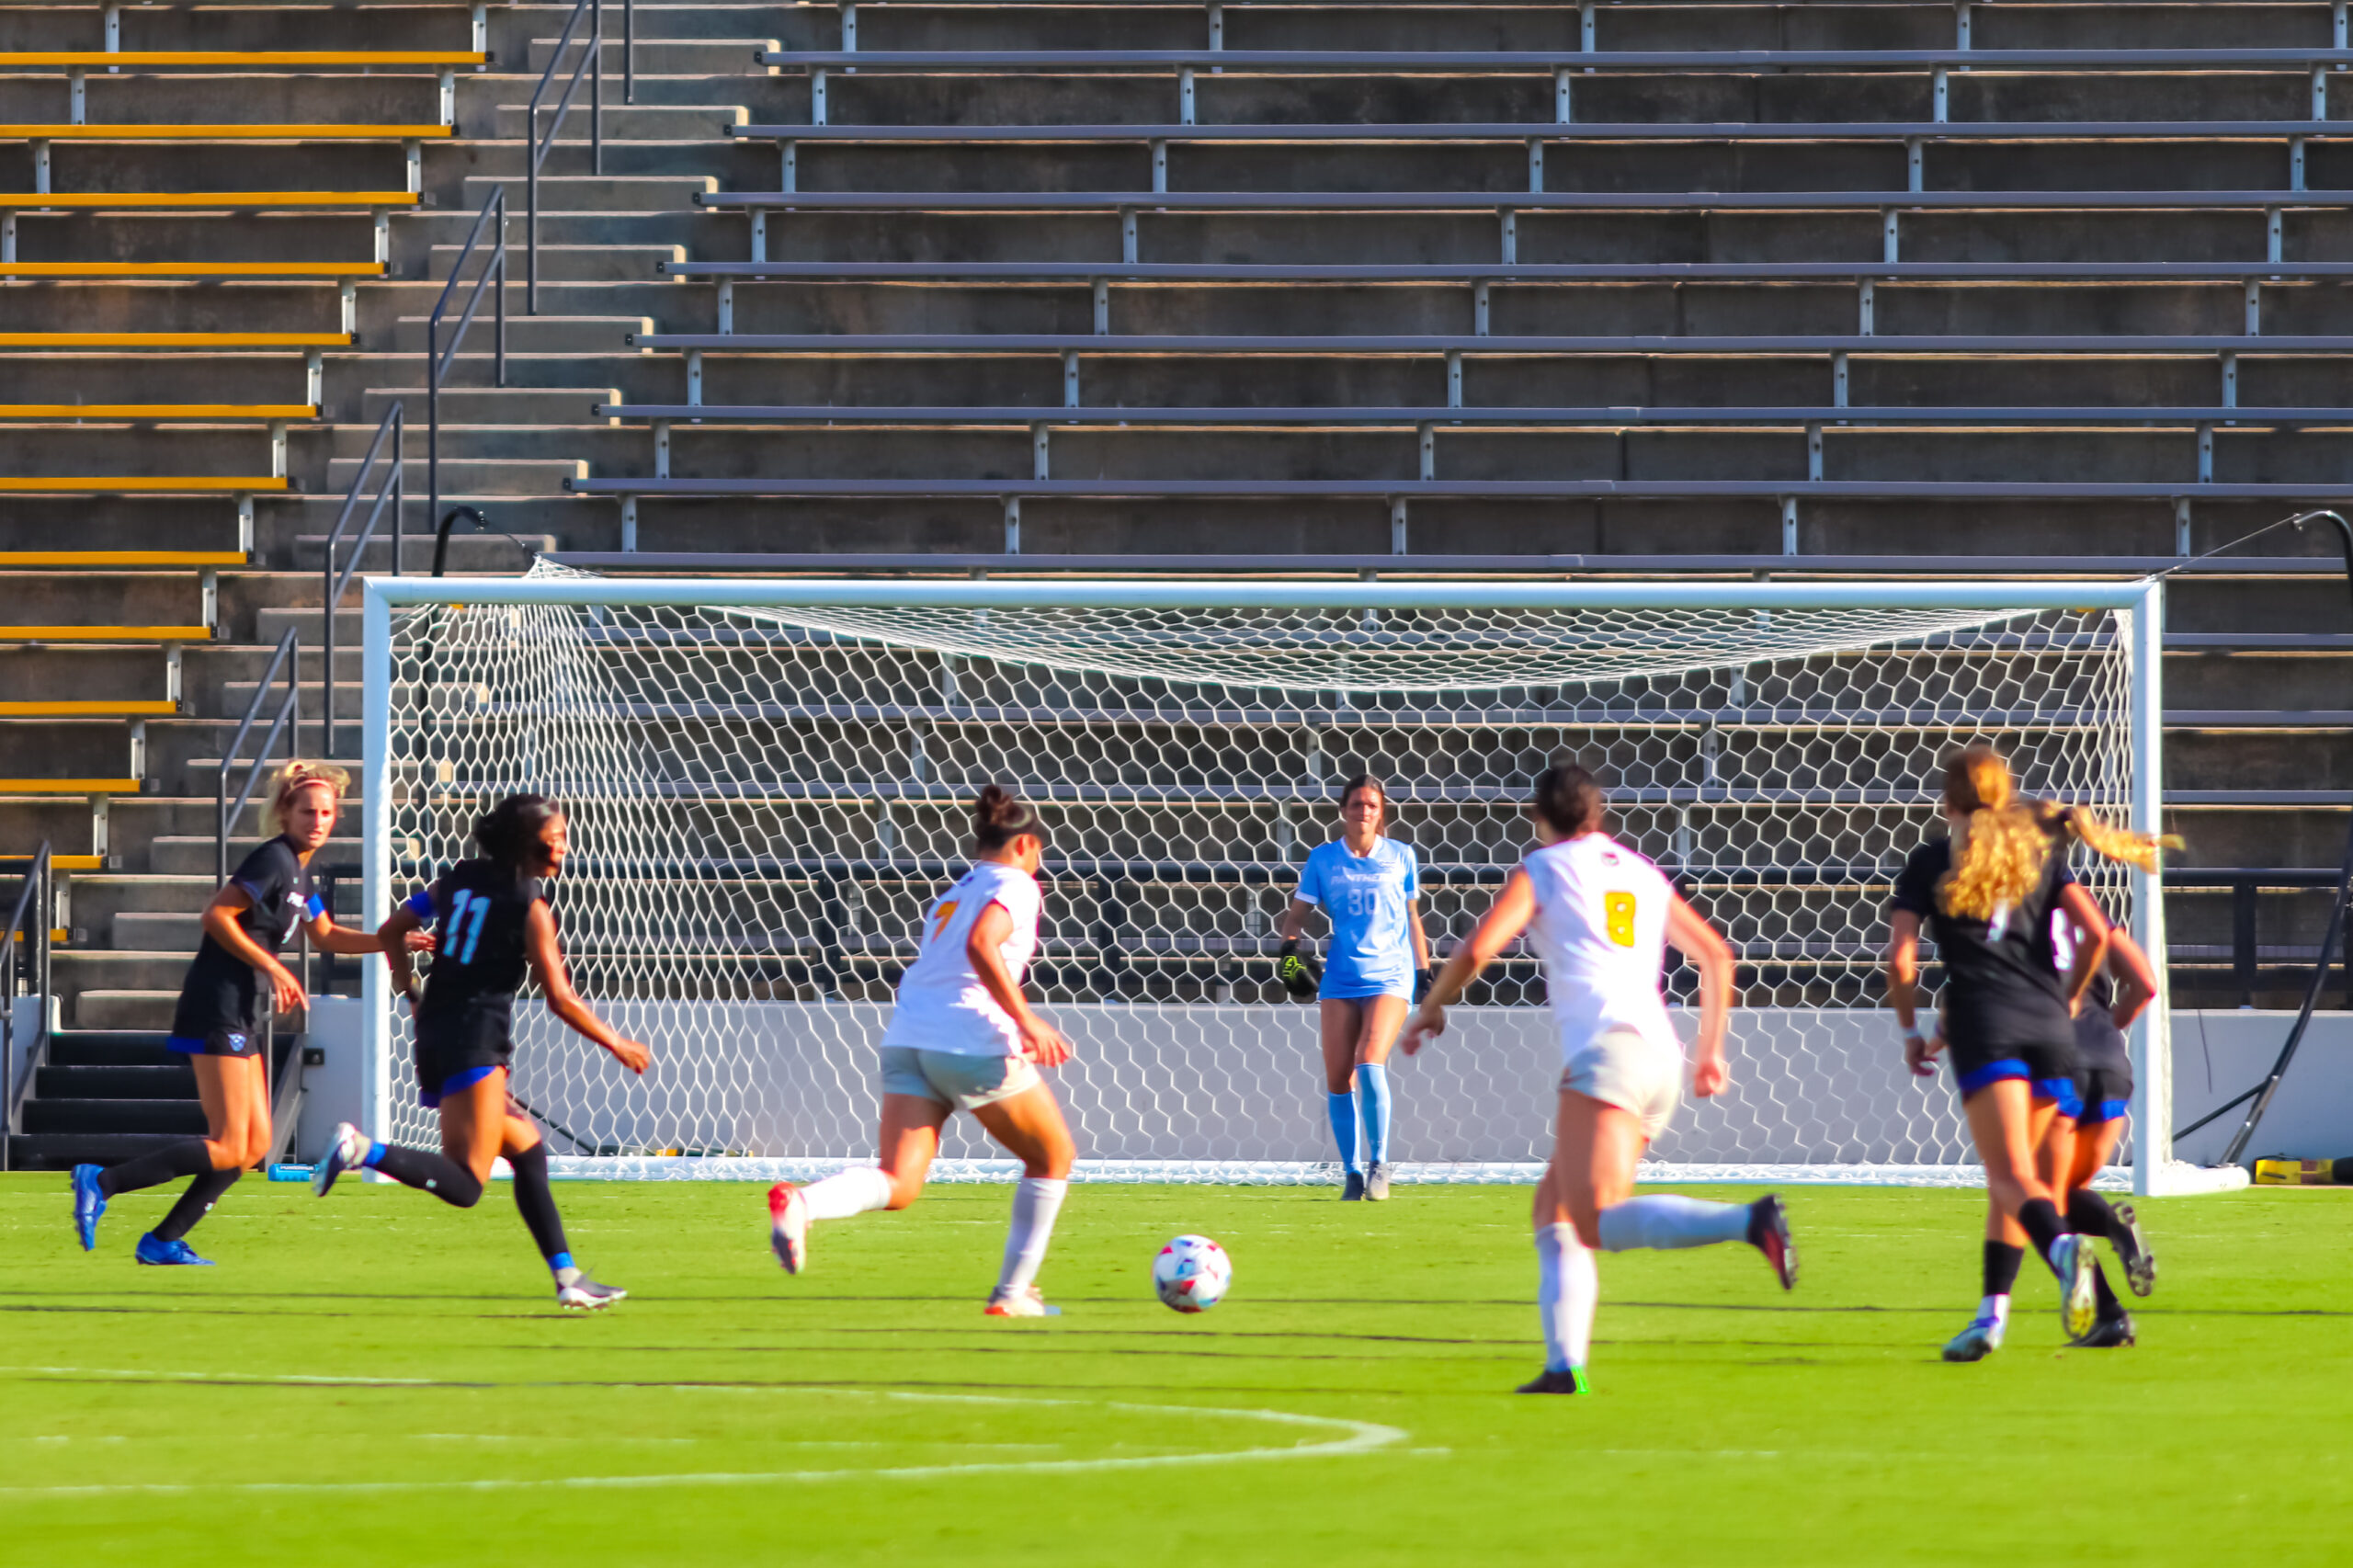 Women’s Soccer play to 2-2 draw against Georgia State Panthers